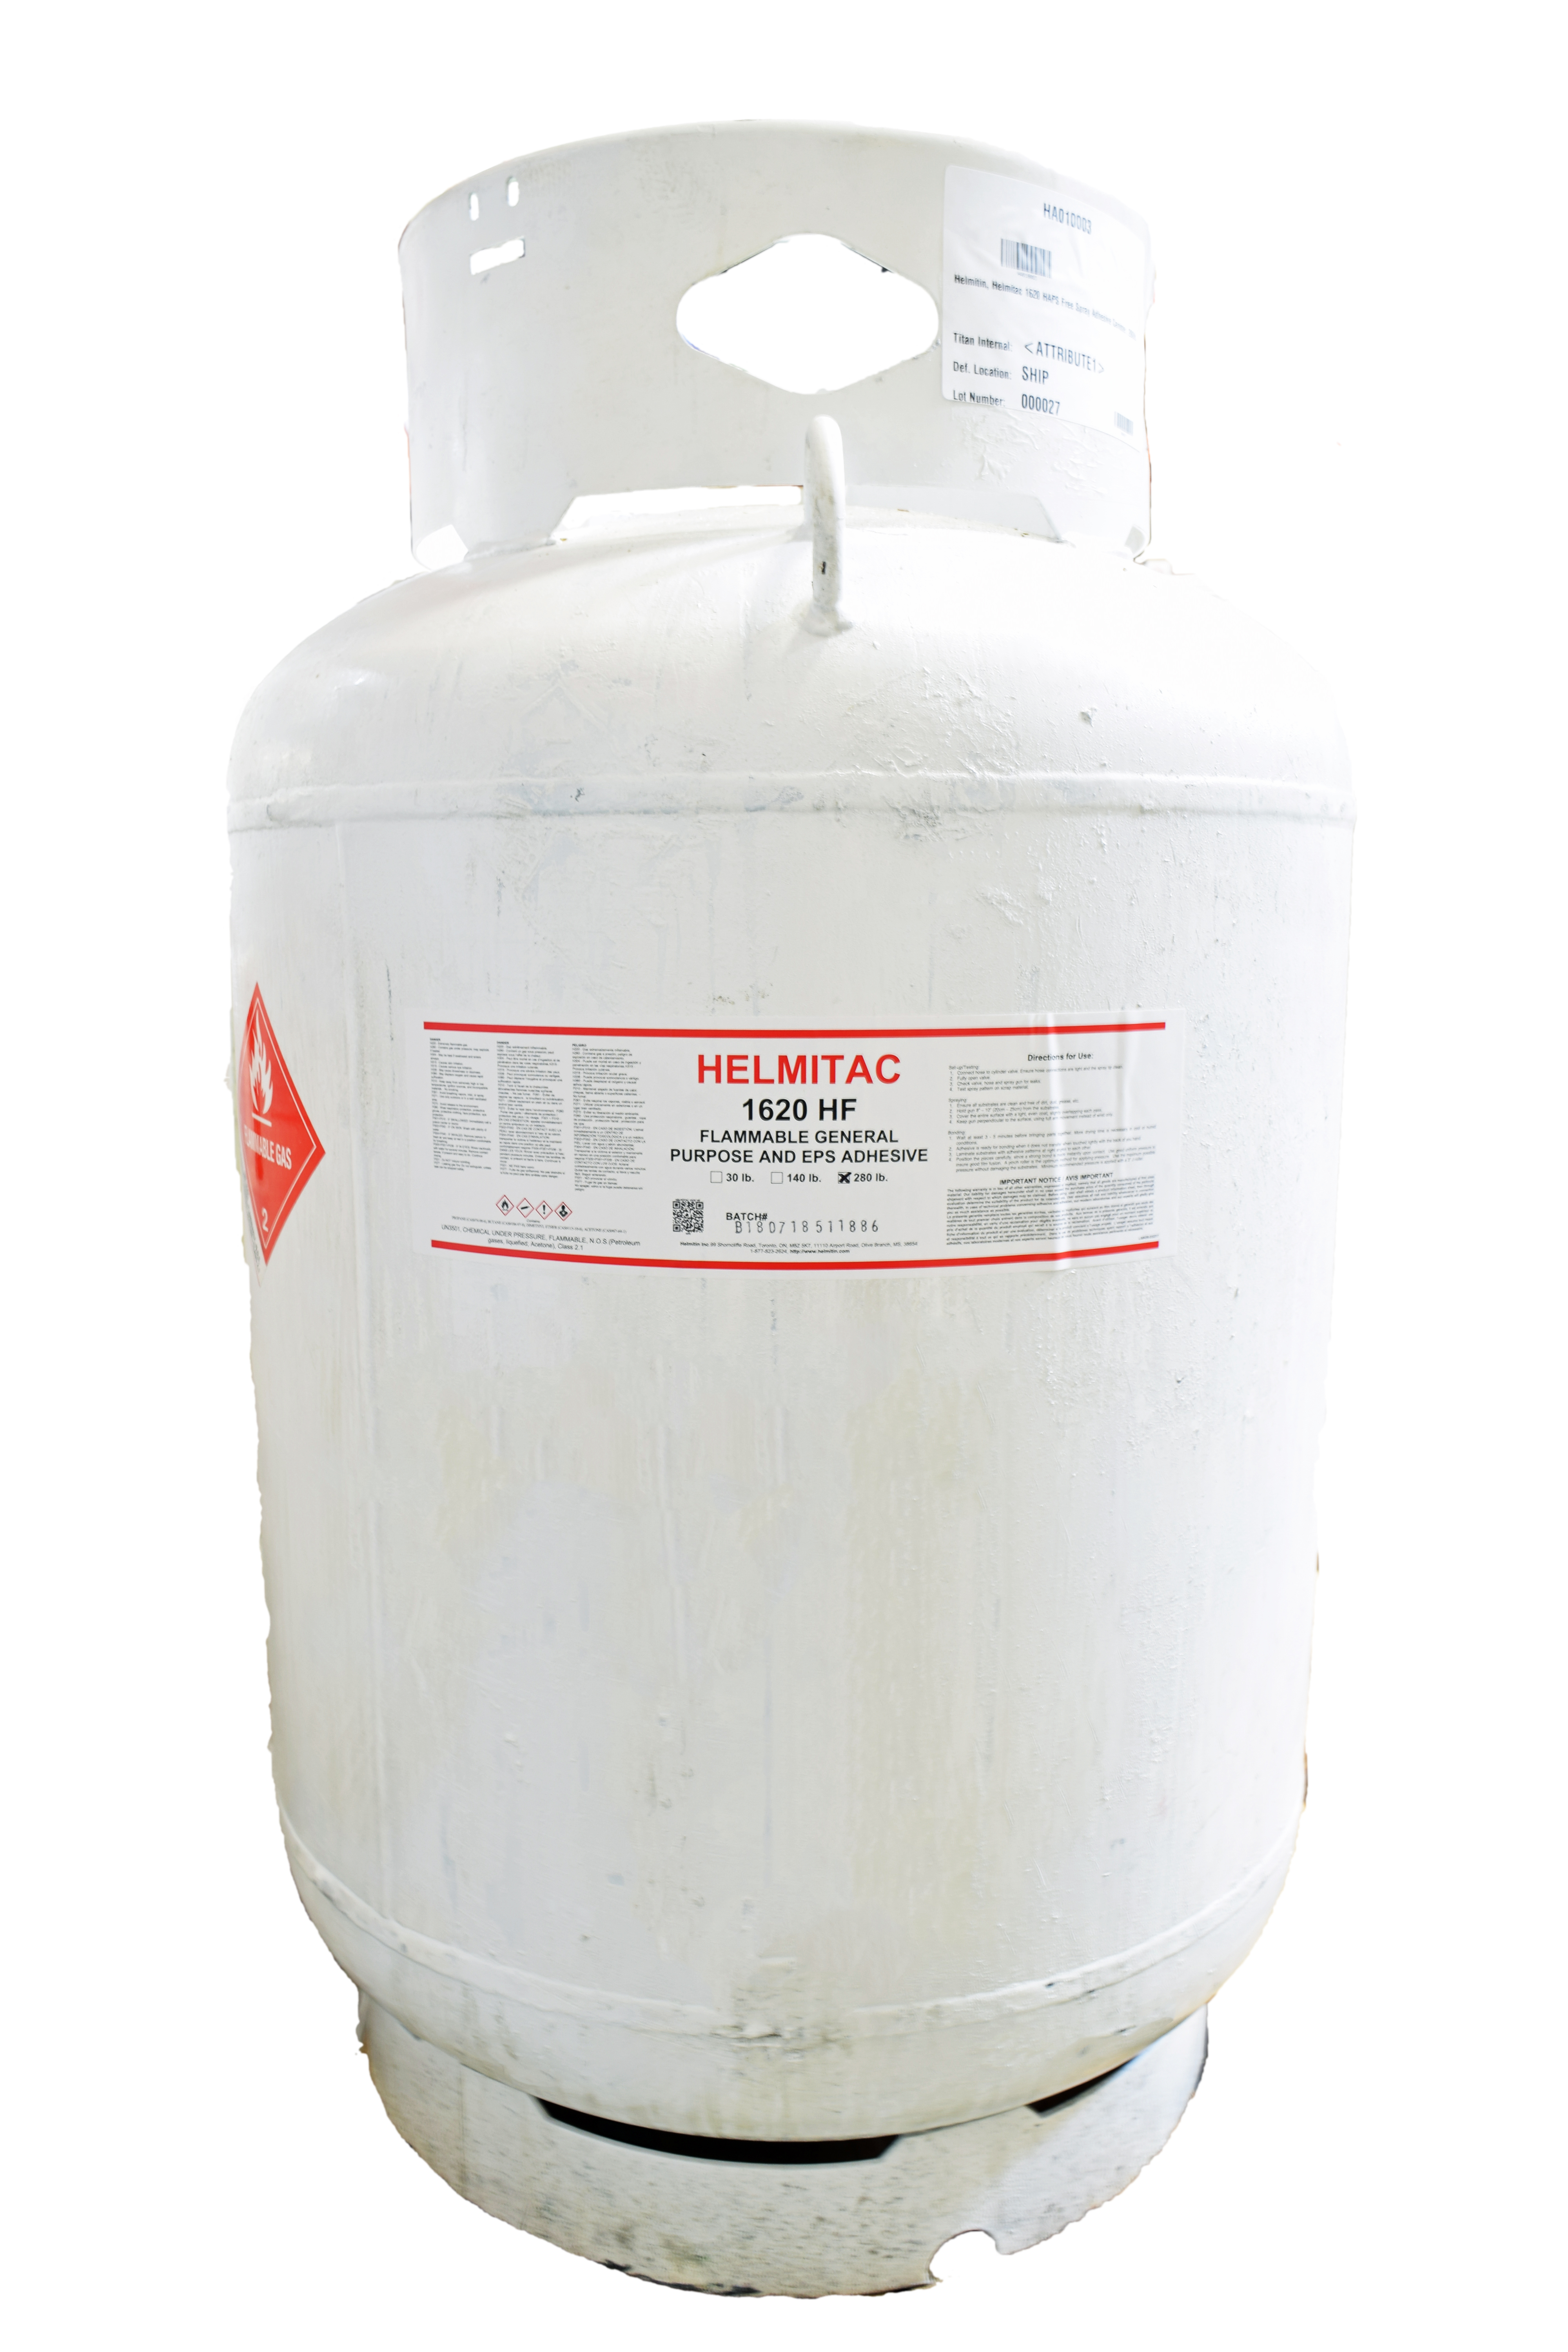 SPRAY DUCT ADHESIVE.  30LB CANISTER. HELMITIN, HELMITAC